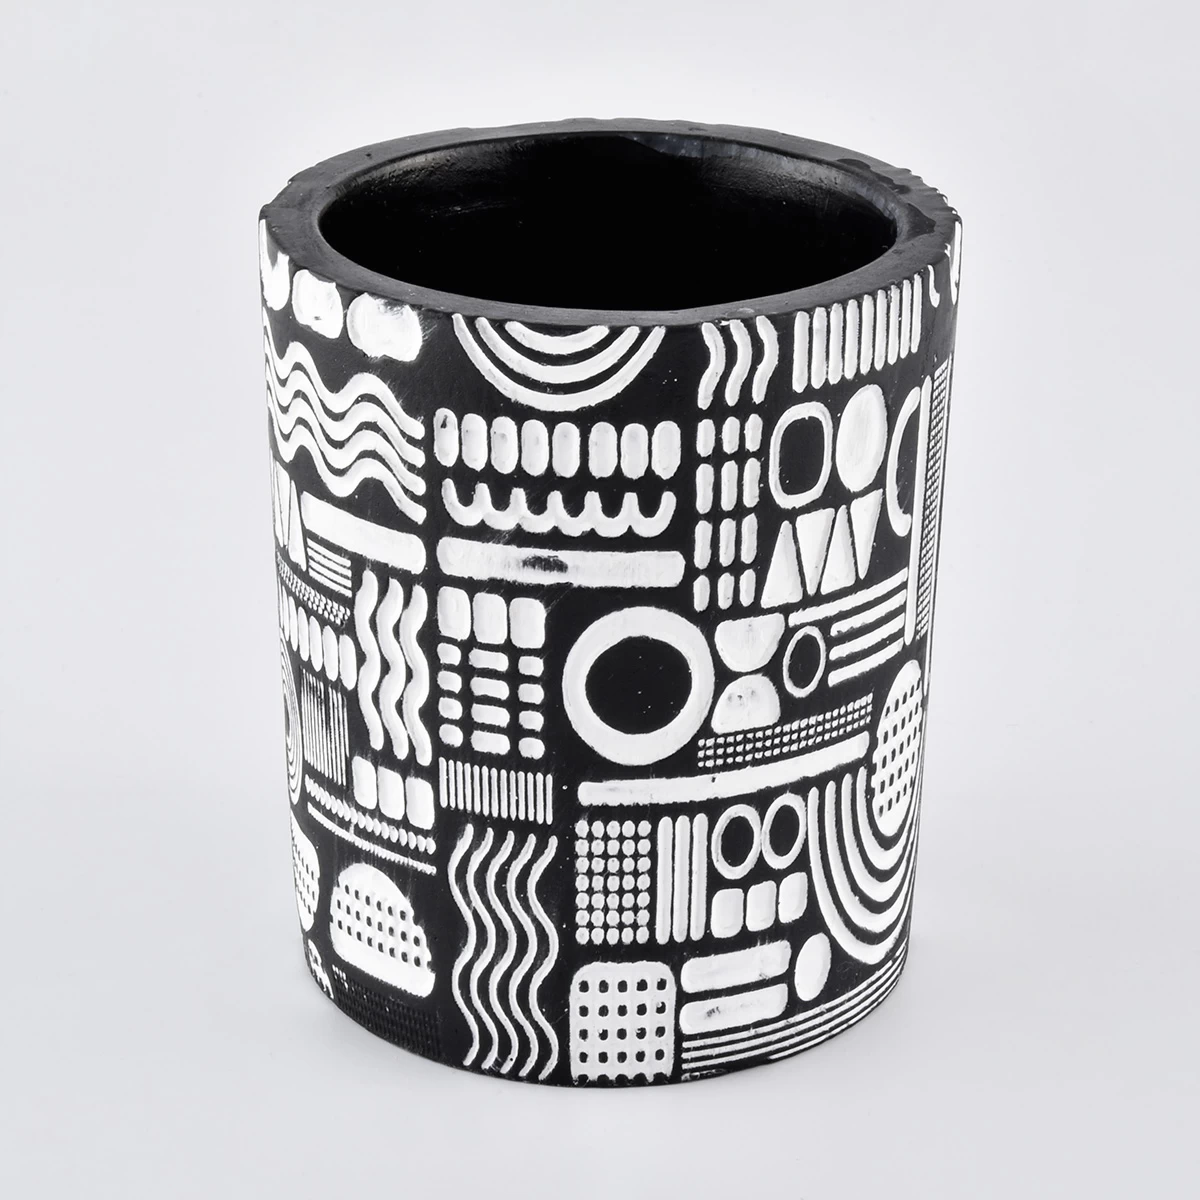 black cement candle jar with white debossed patterns, empty candle holders